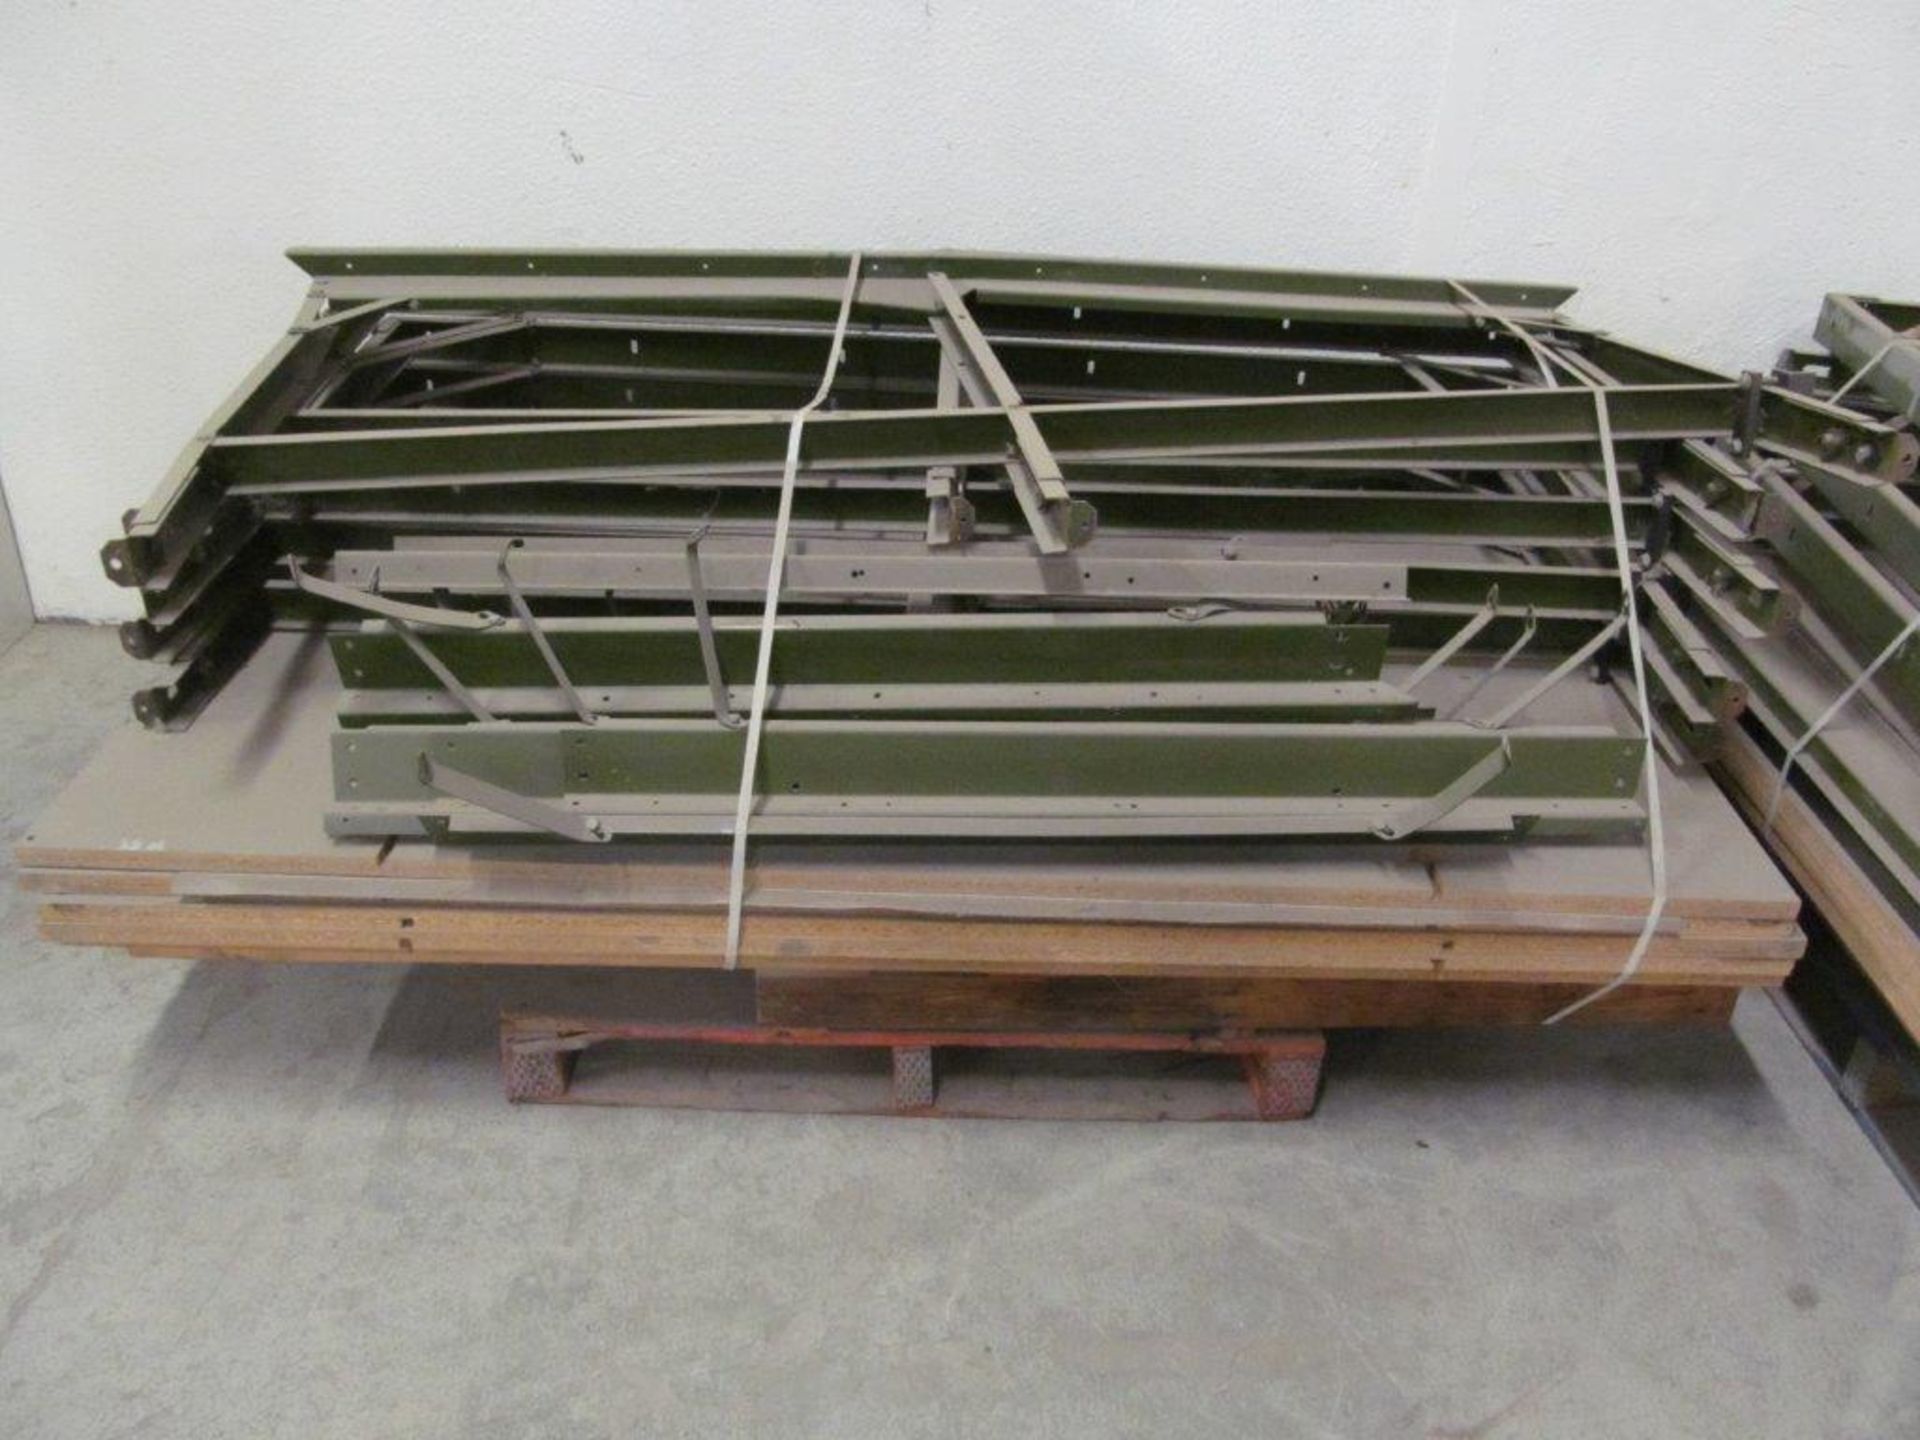 (1) LOT TEXTILE CUTTING TABLES, 4 FT X 8 FT, C/W STEEL FRAMES - Image 2 of 2